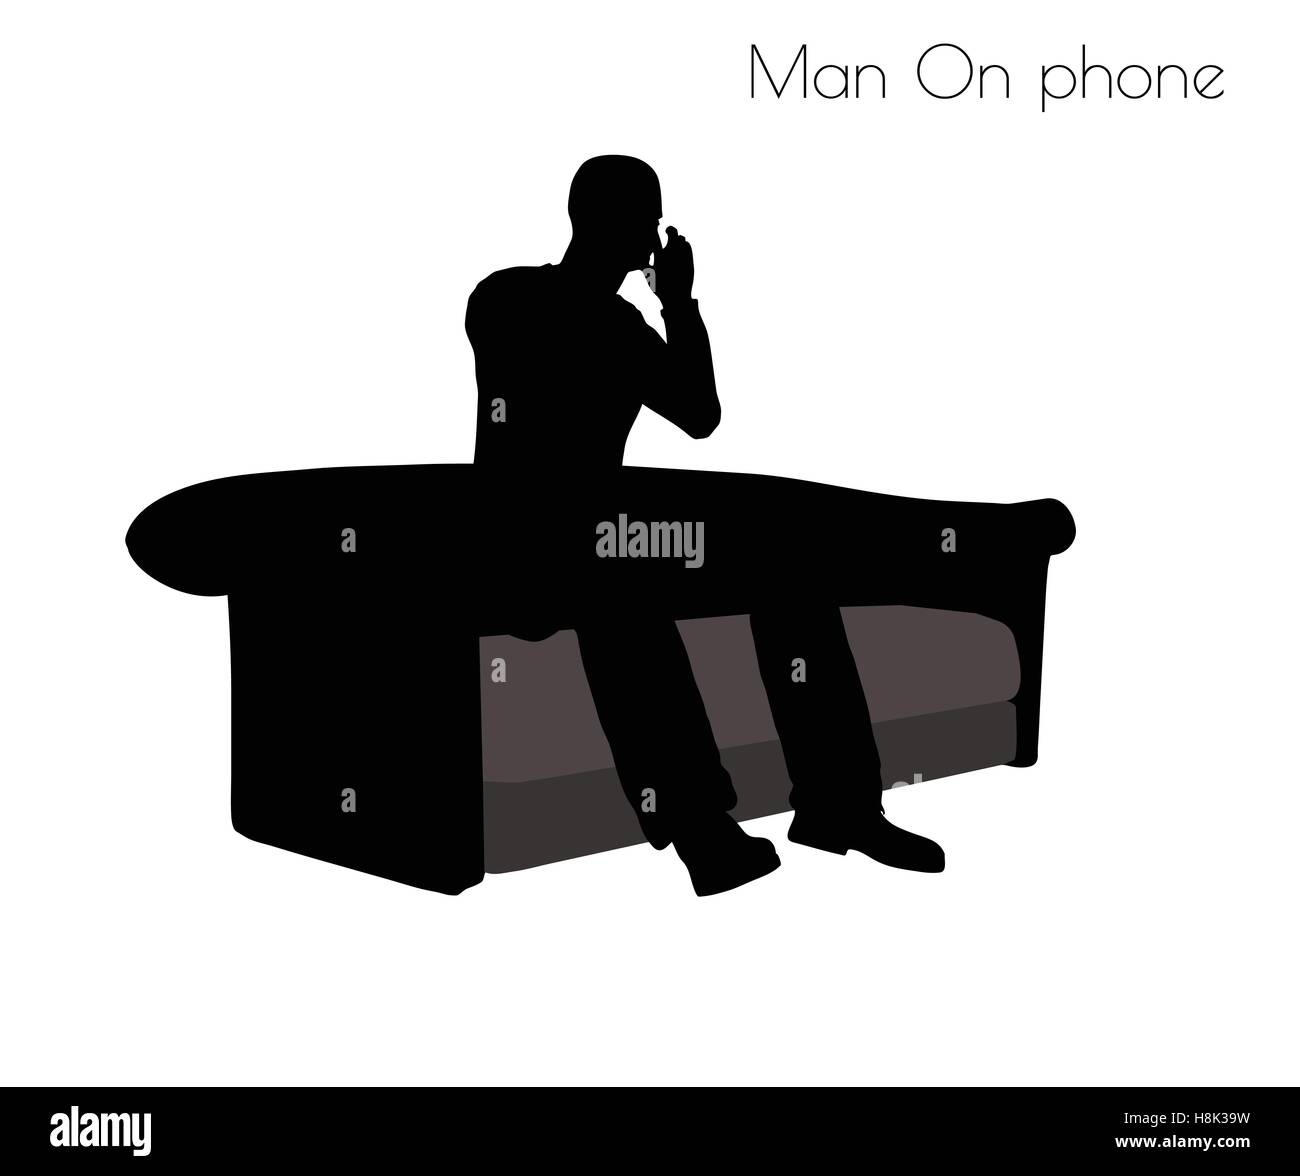 EPS 10 vector illustration of Man On phone pose on white background Stock Vector